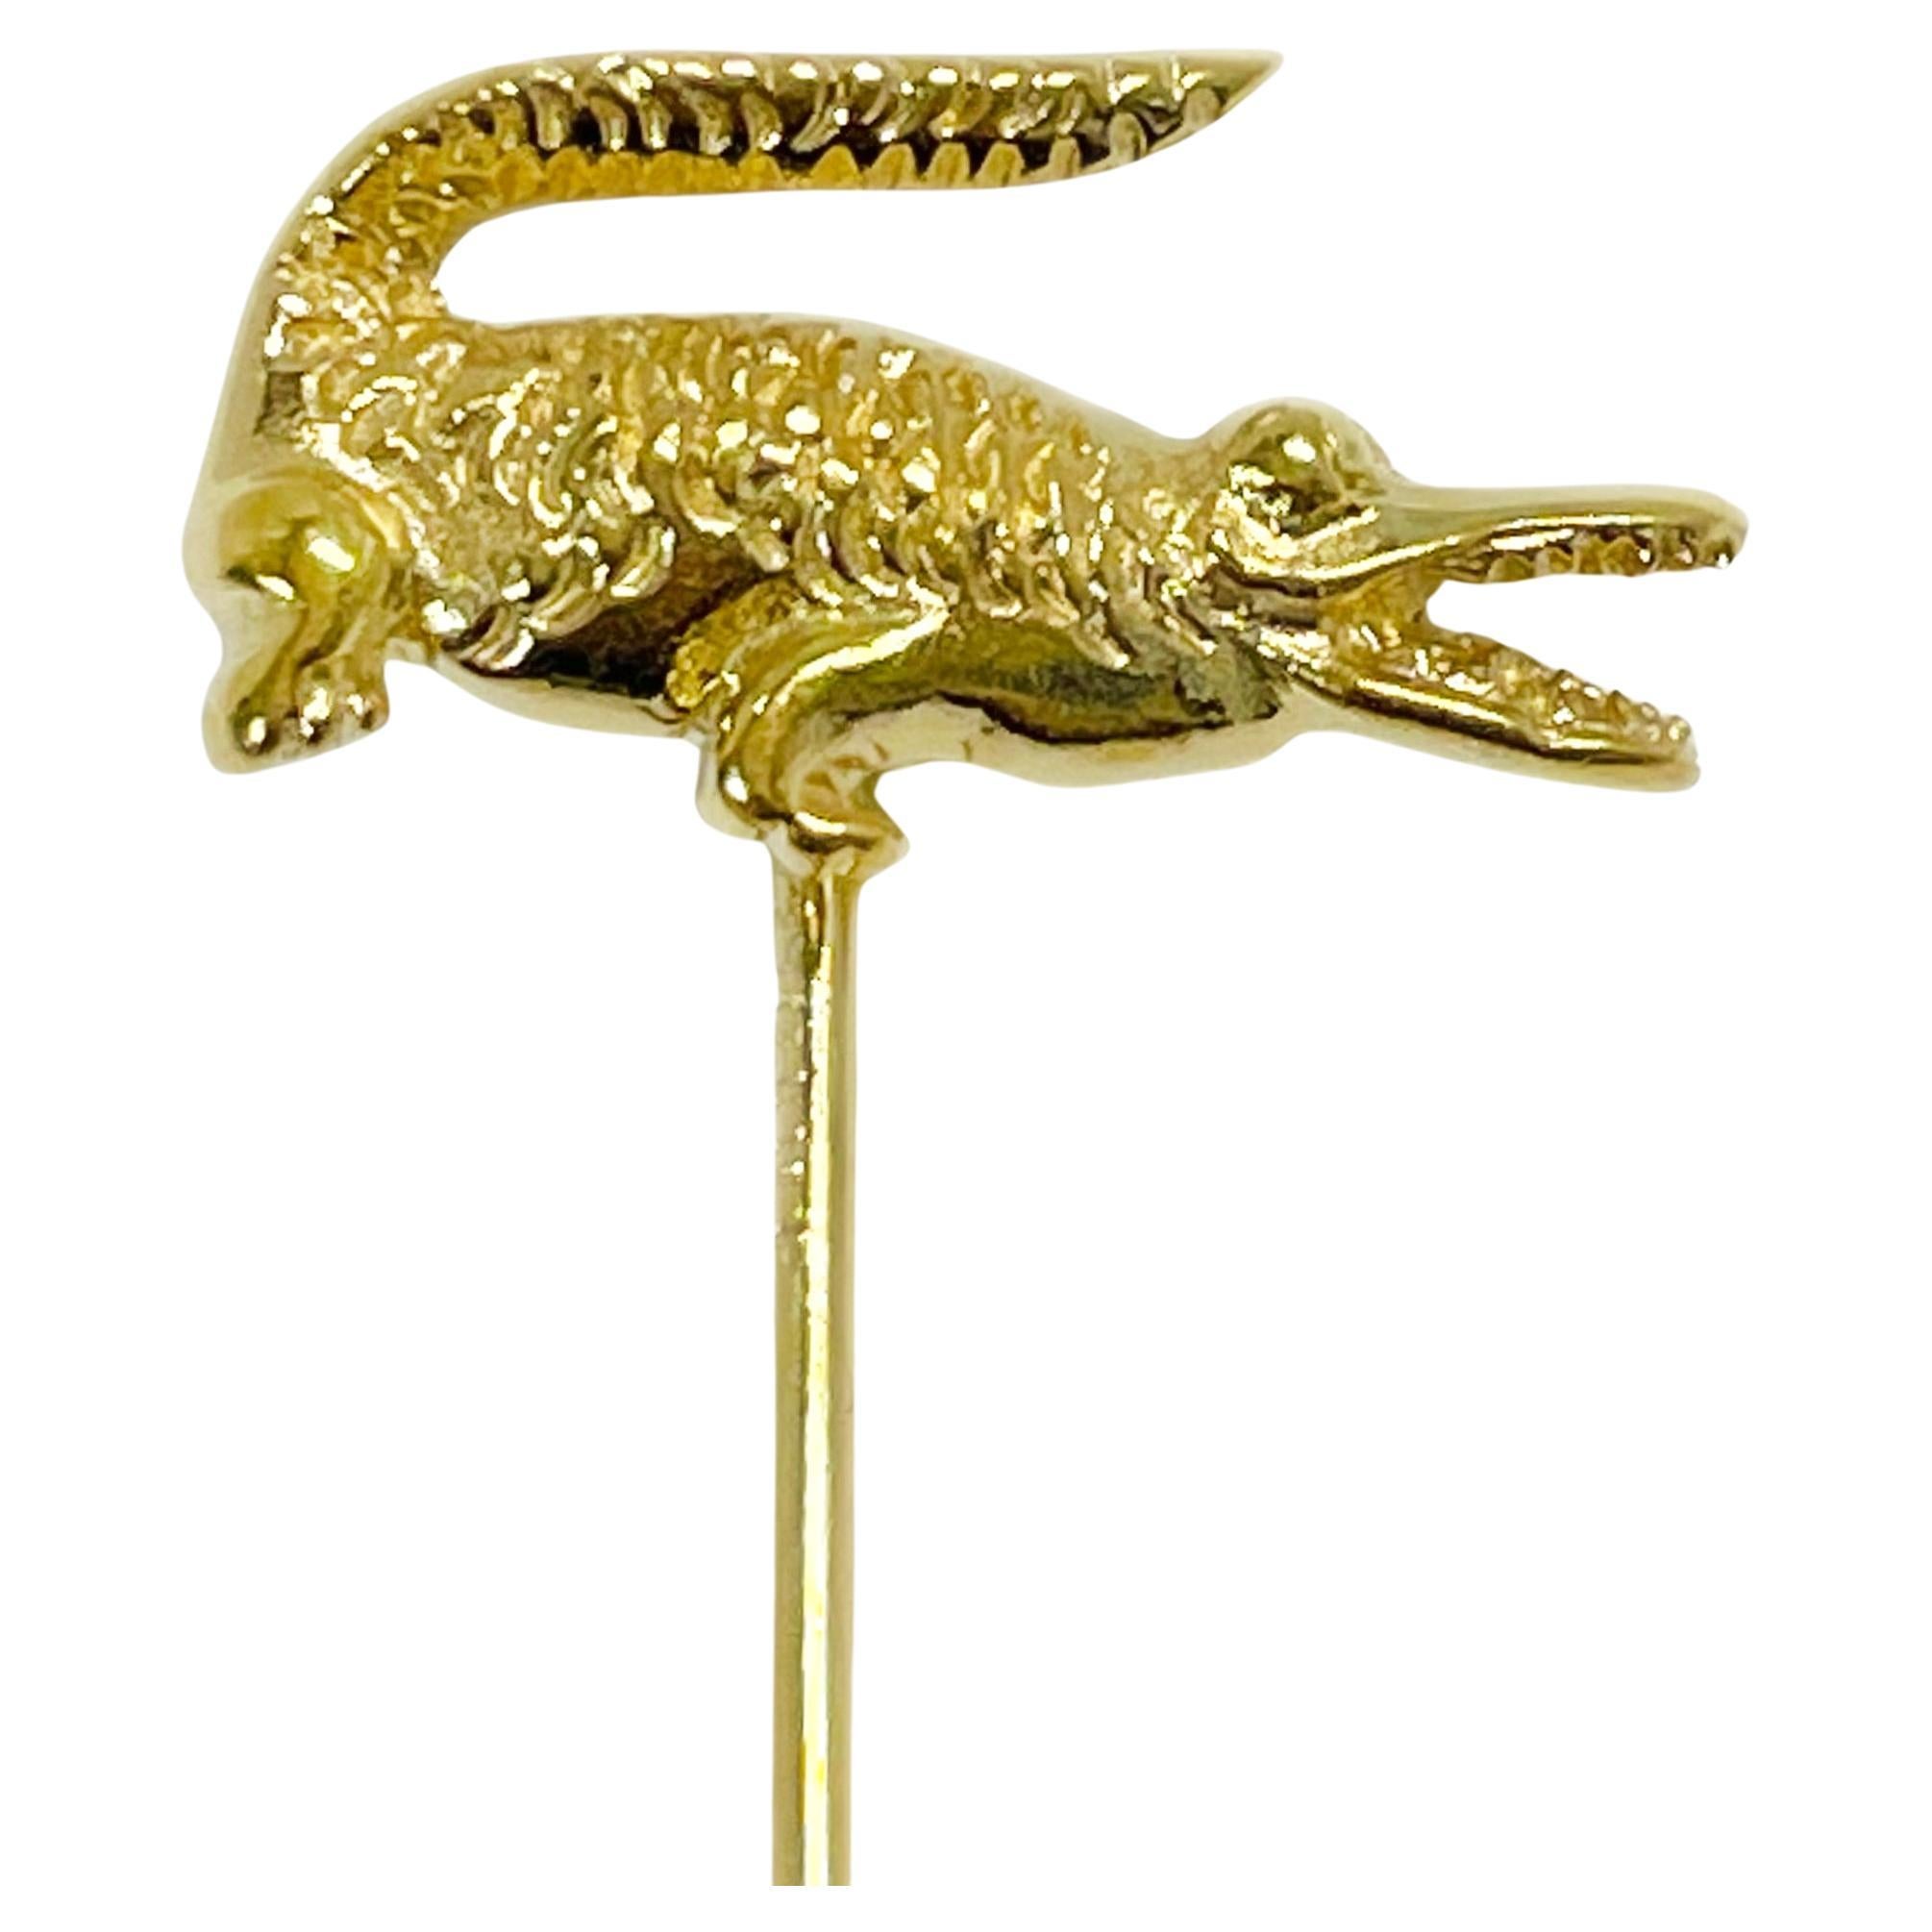 Lacoste Yellow Gold Alligator Stick Pin For Sale